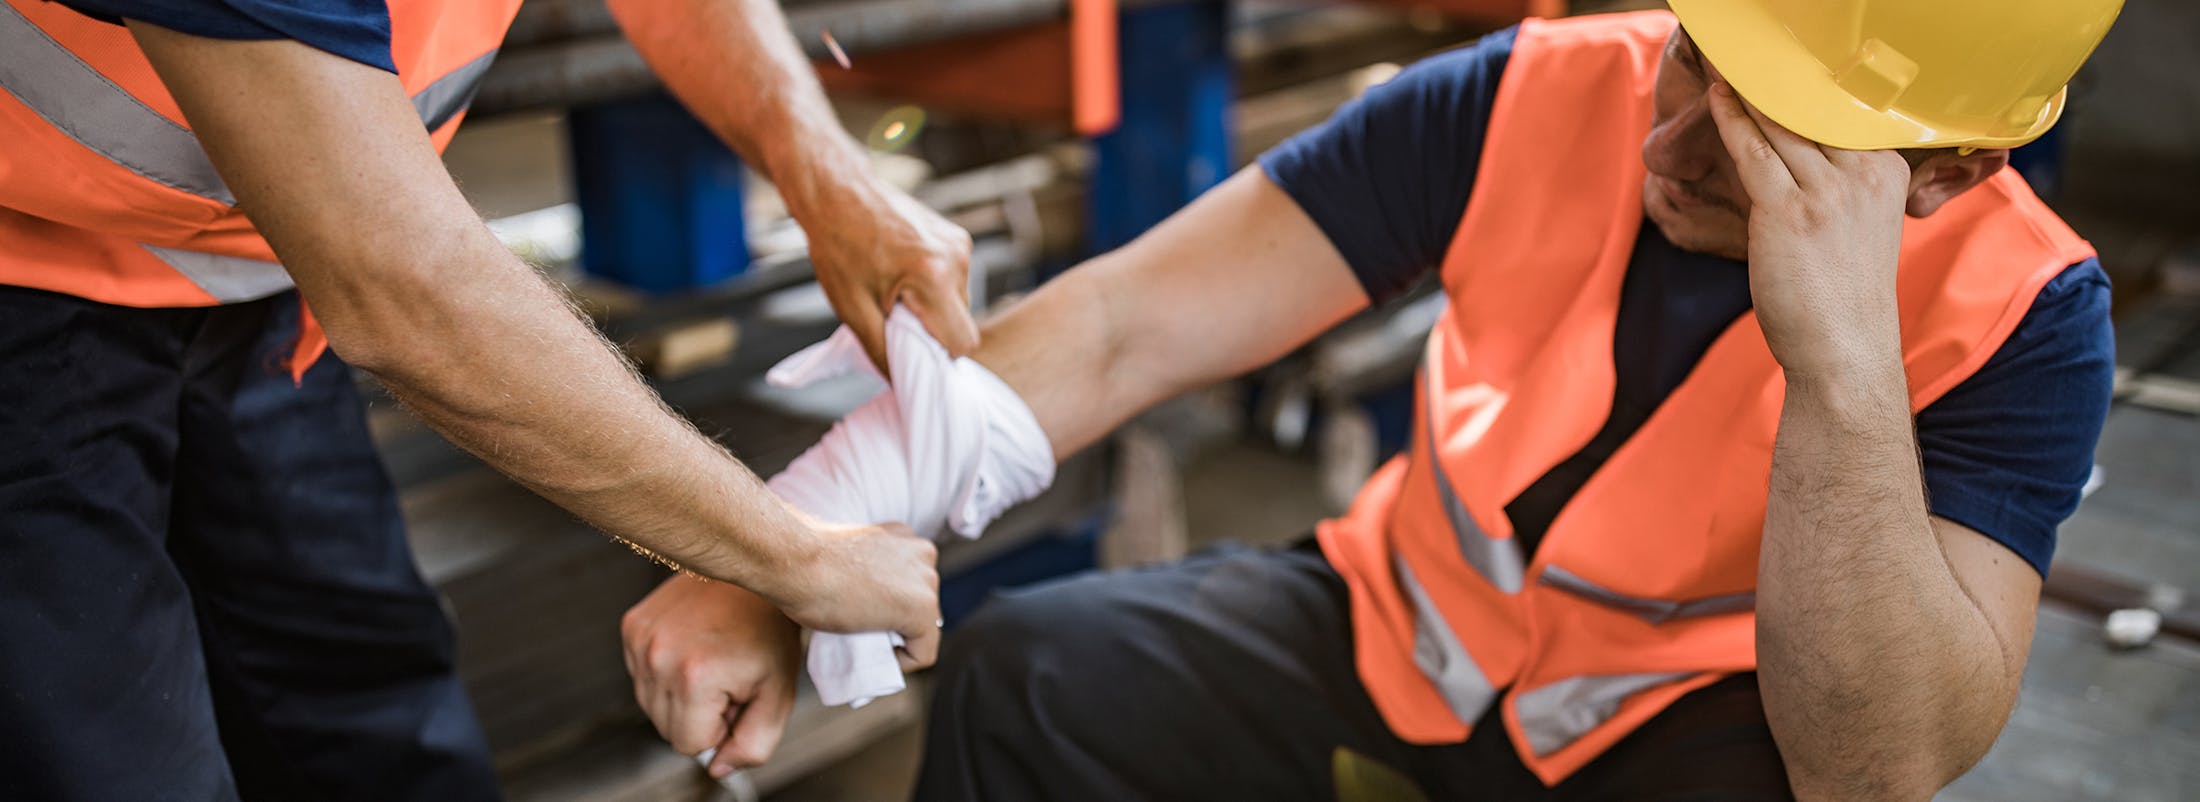 Man getting temporary treatment for construction injury